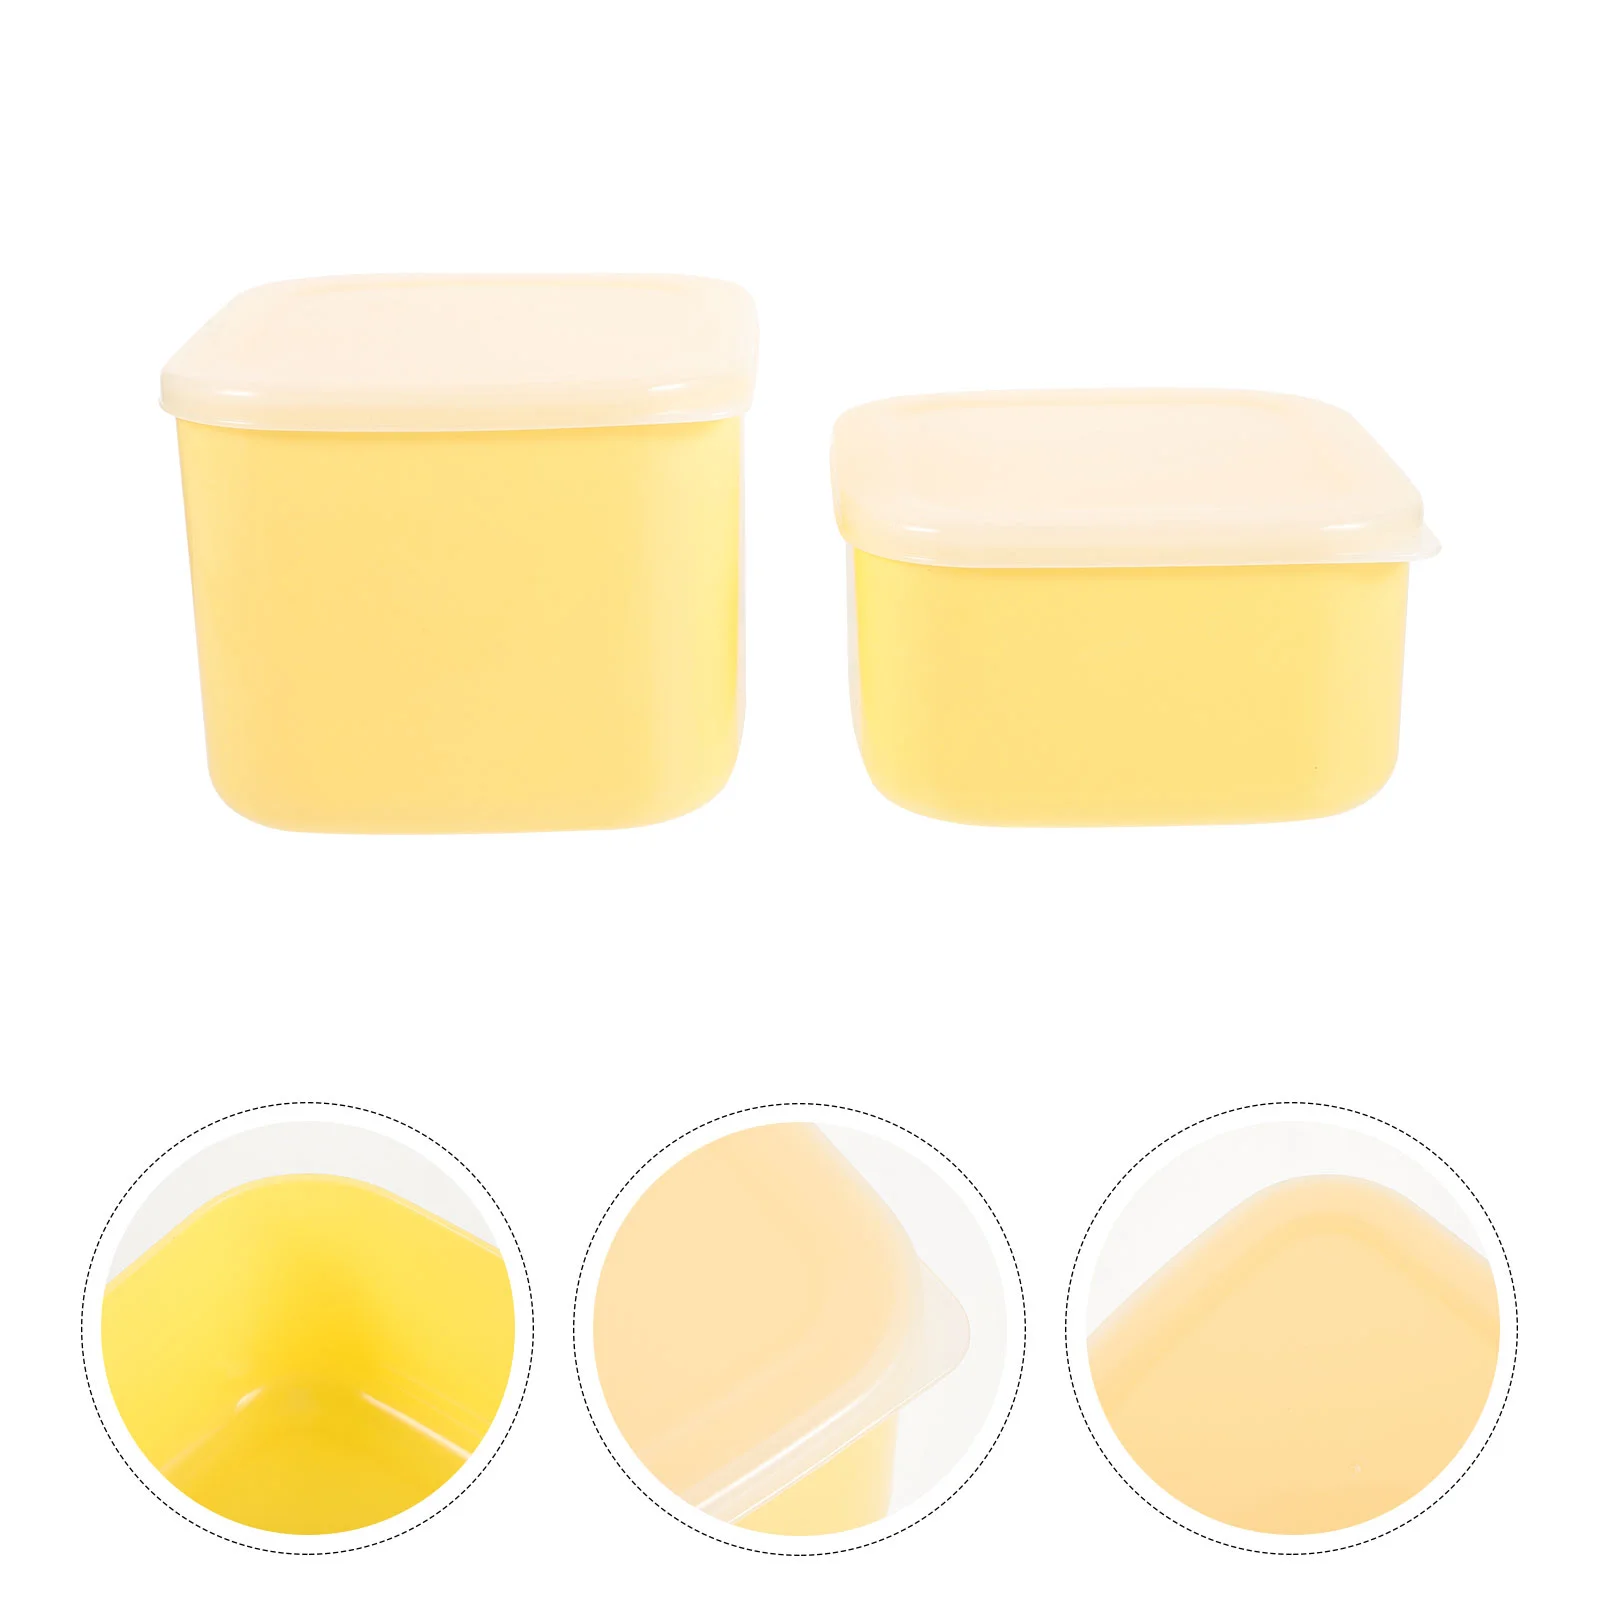 

2 Pcs Cheese Crisper Go Food Containers Lids Slices Storage Holders Cover Sealing Butter Cases Portable Pp Kitchen Design